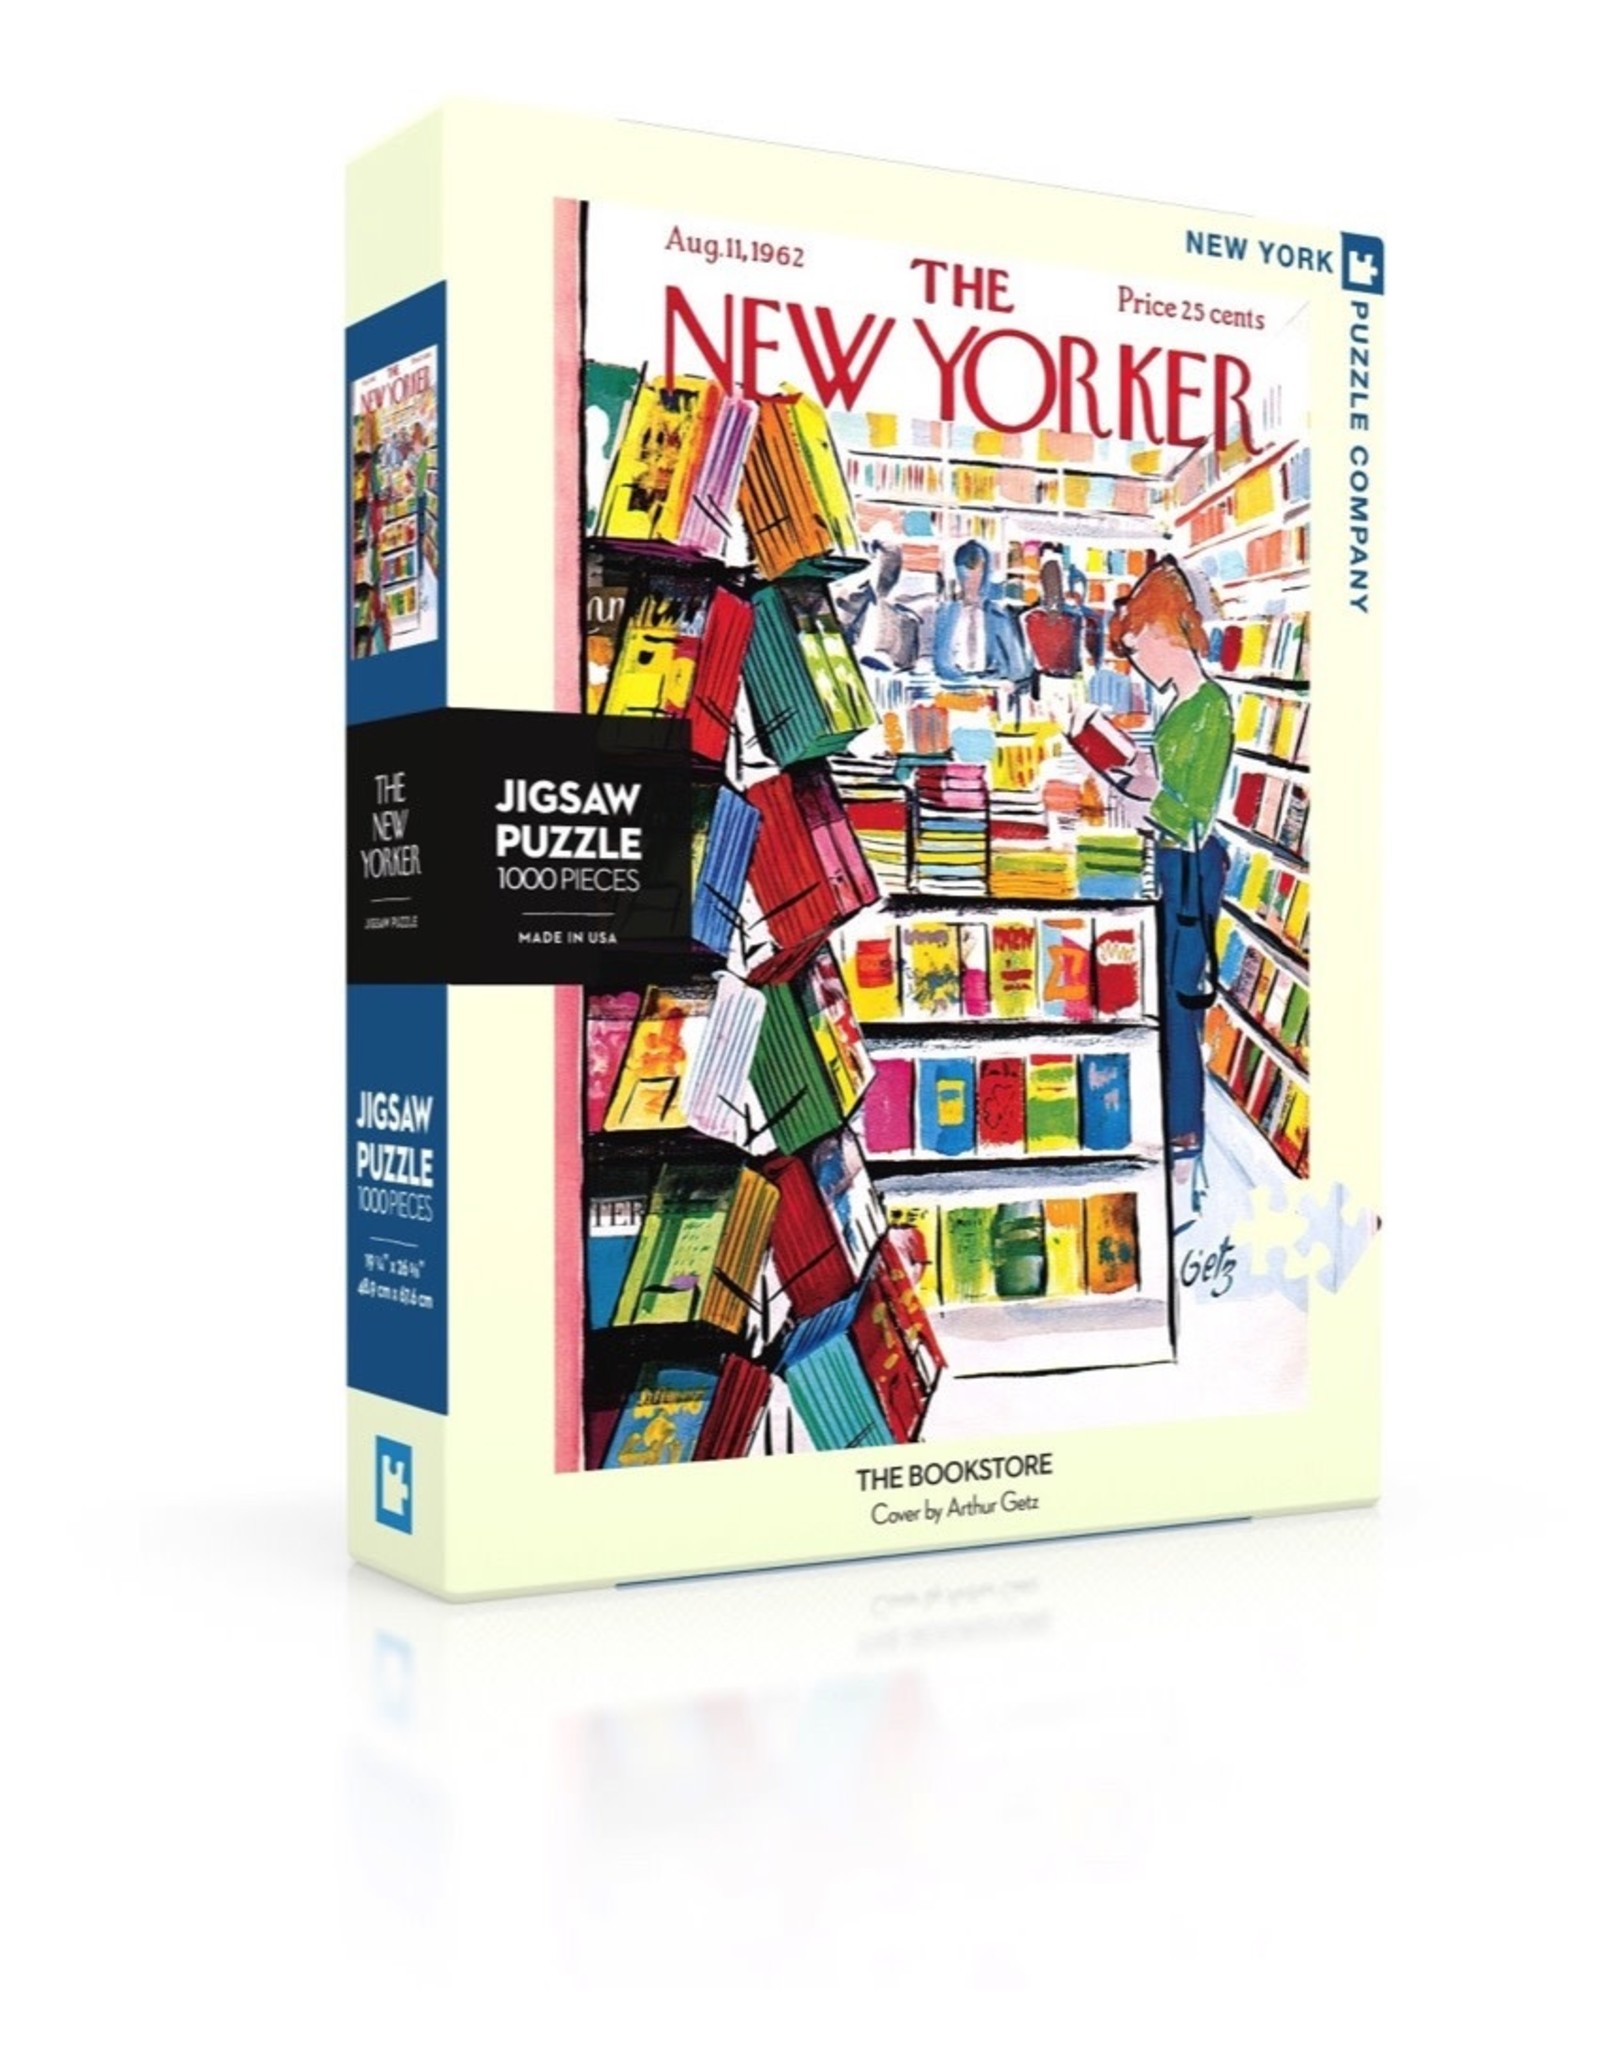 New York Puzzle Company New Yorker - The Bookstore 1000pc New York Puzzle Company Jigsaw Puzzle